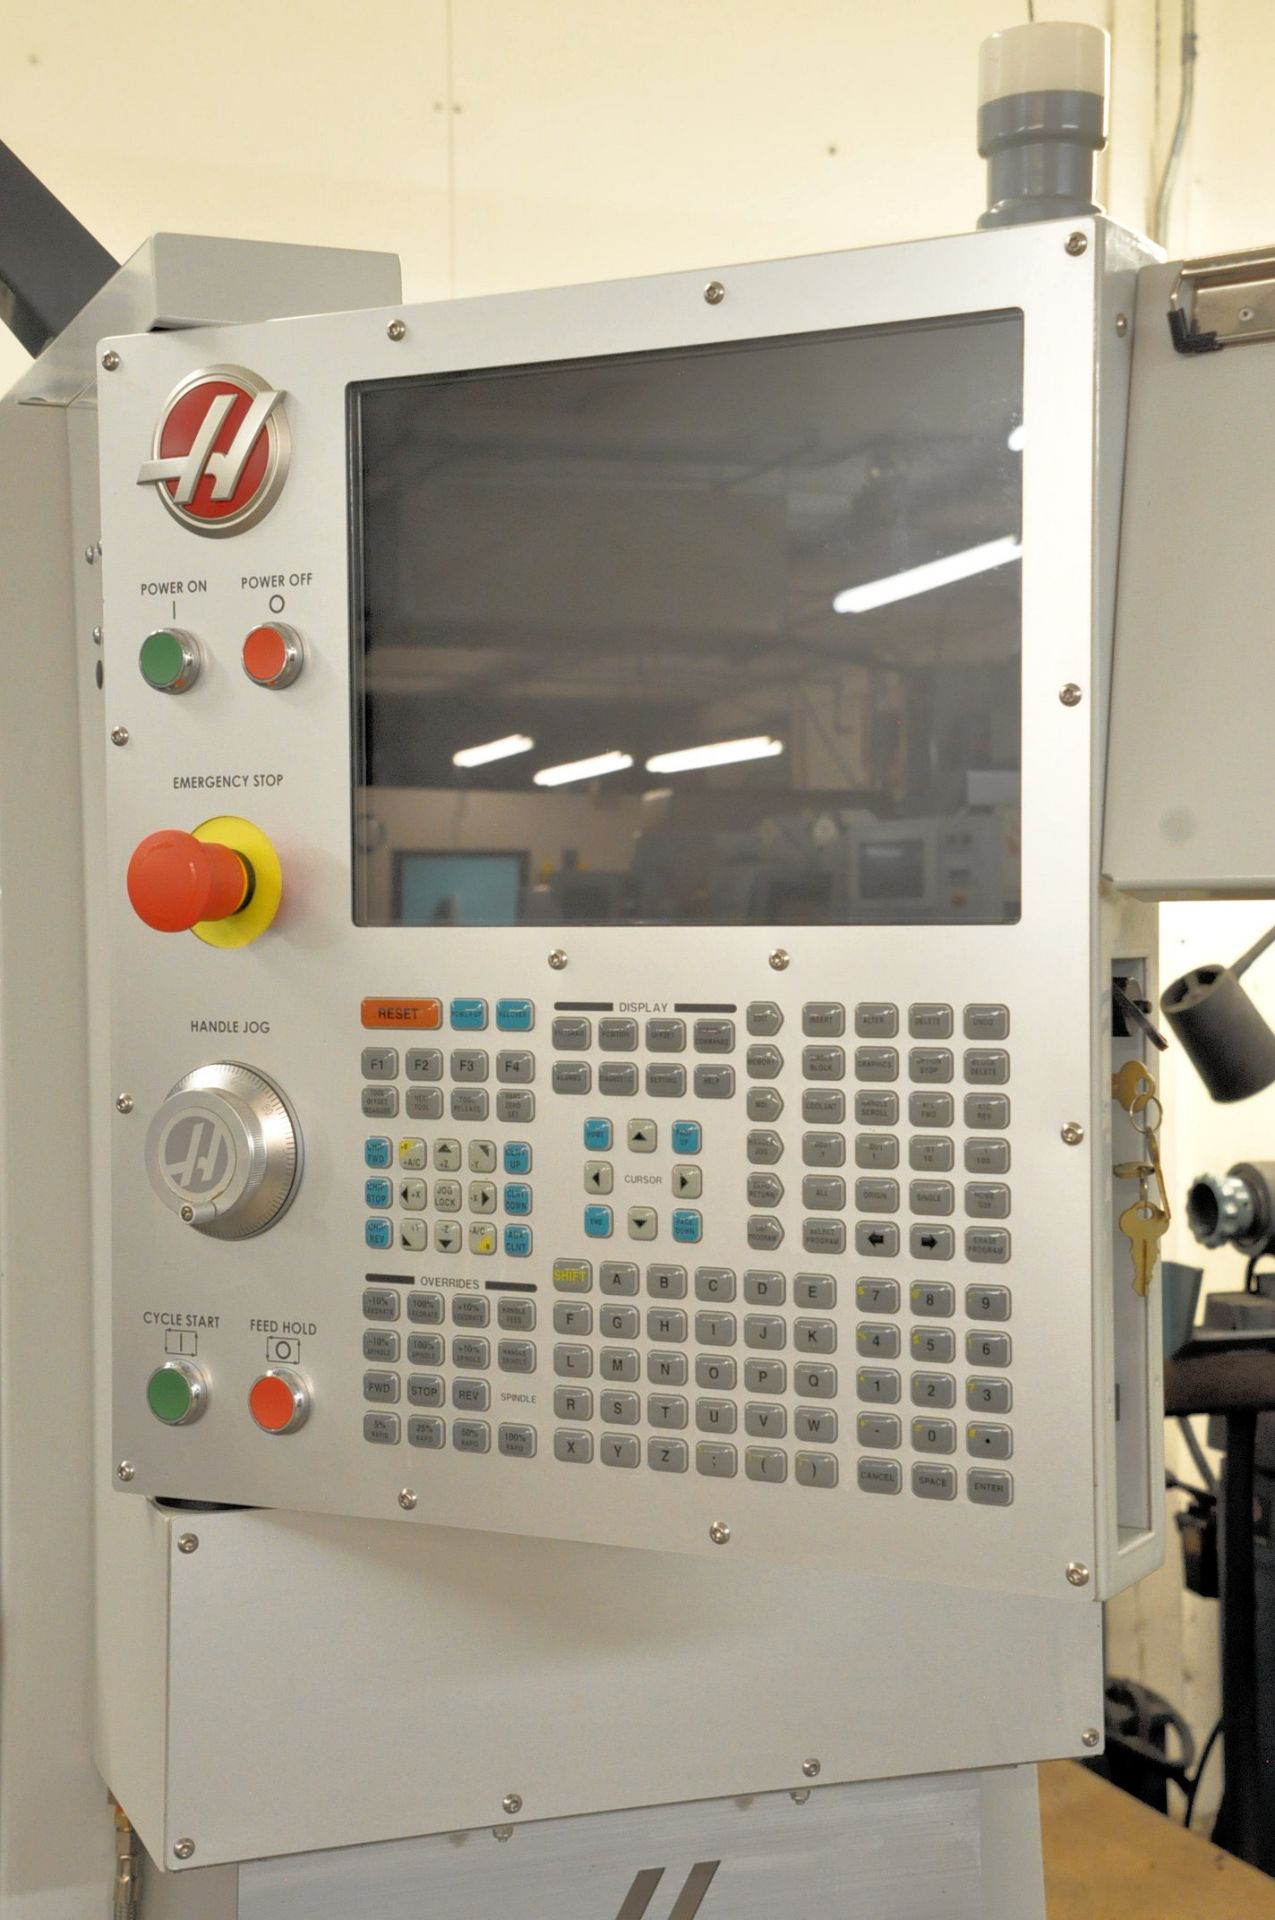 Haas VF2 CNC Vertical Machining Center, s/n 1154894, New 2018, Haas CNC Control, 20 HP, 8,100 RPM, - Image 2 of 7